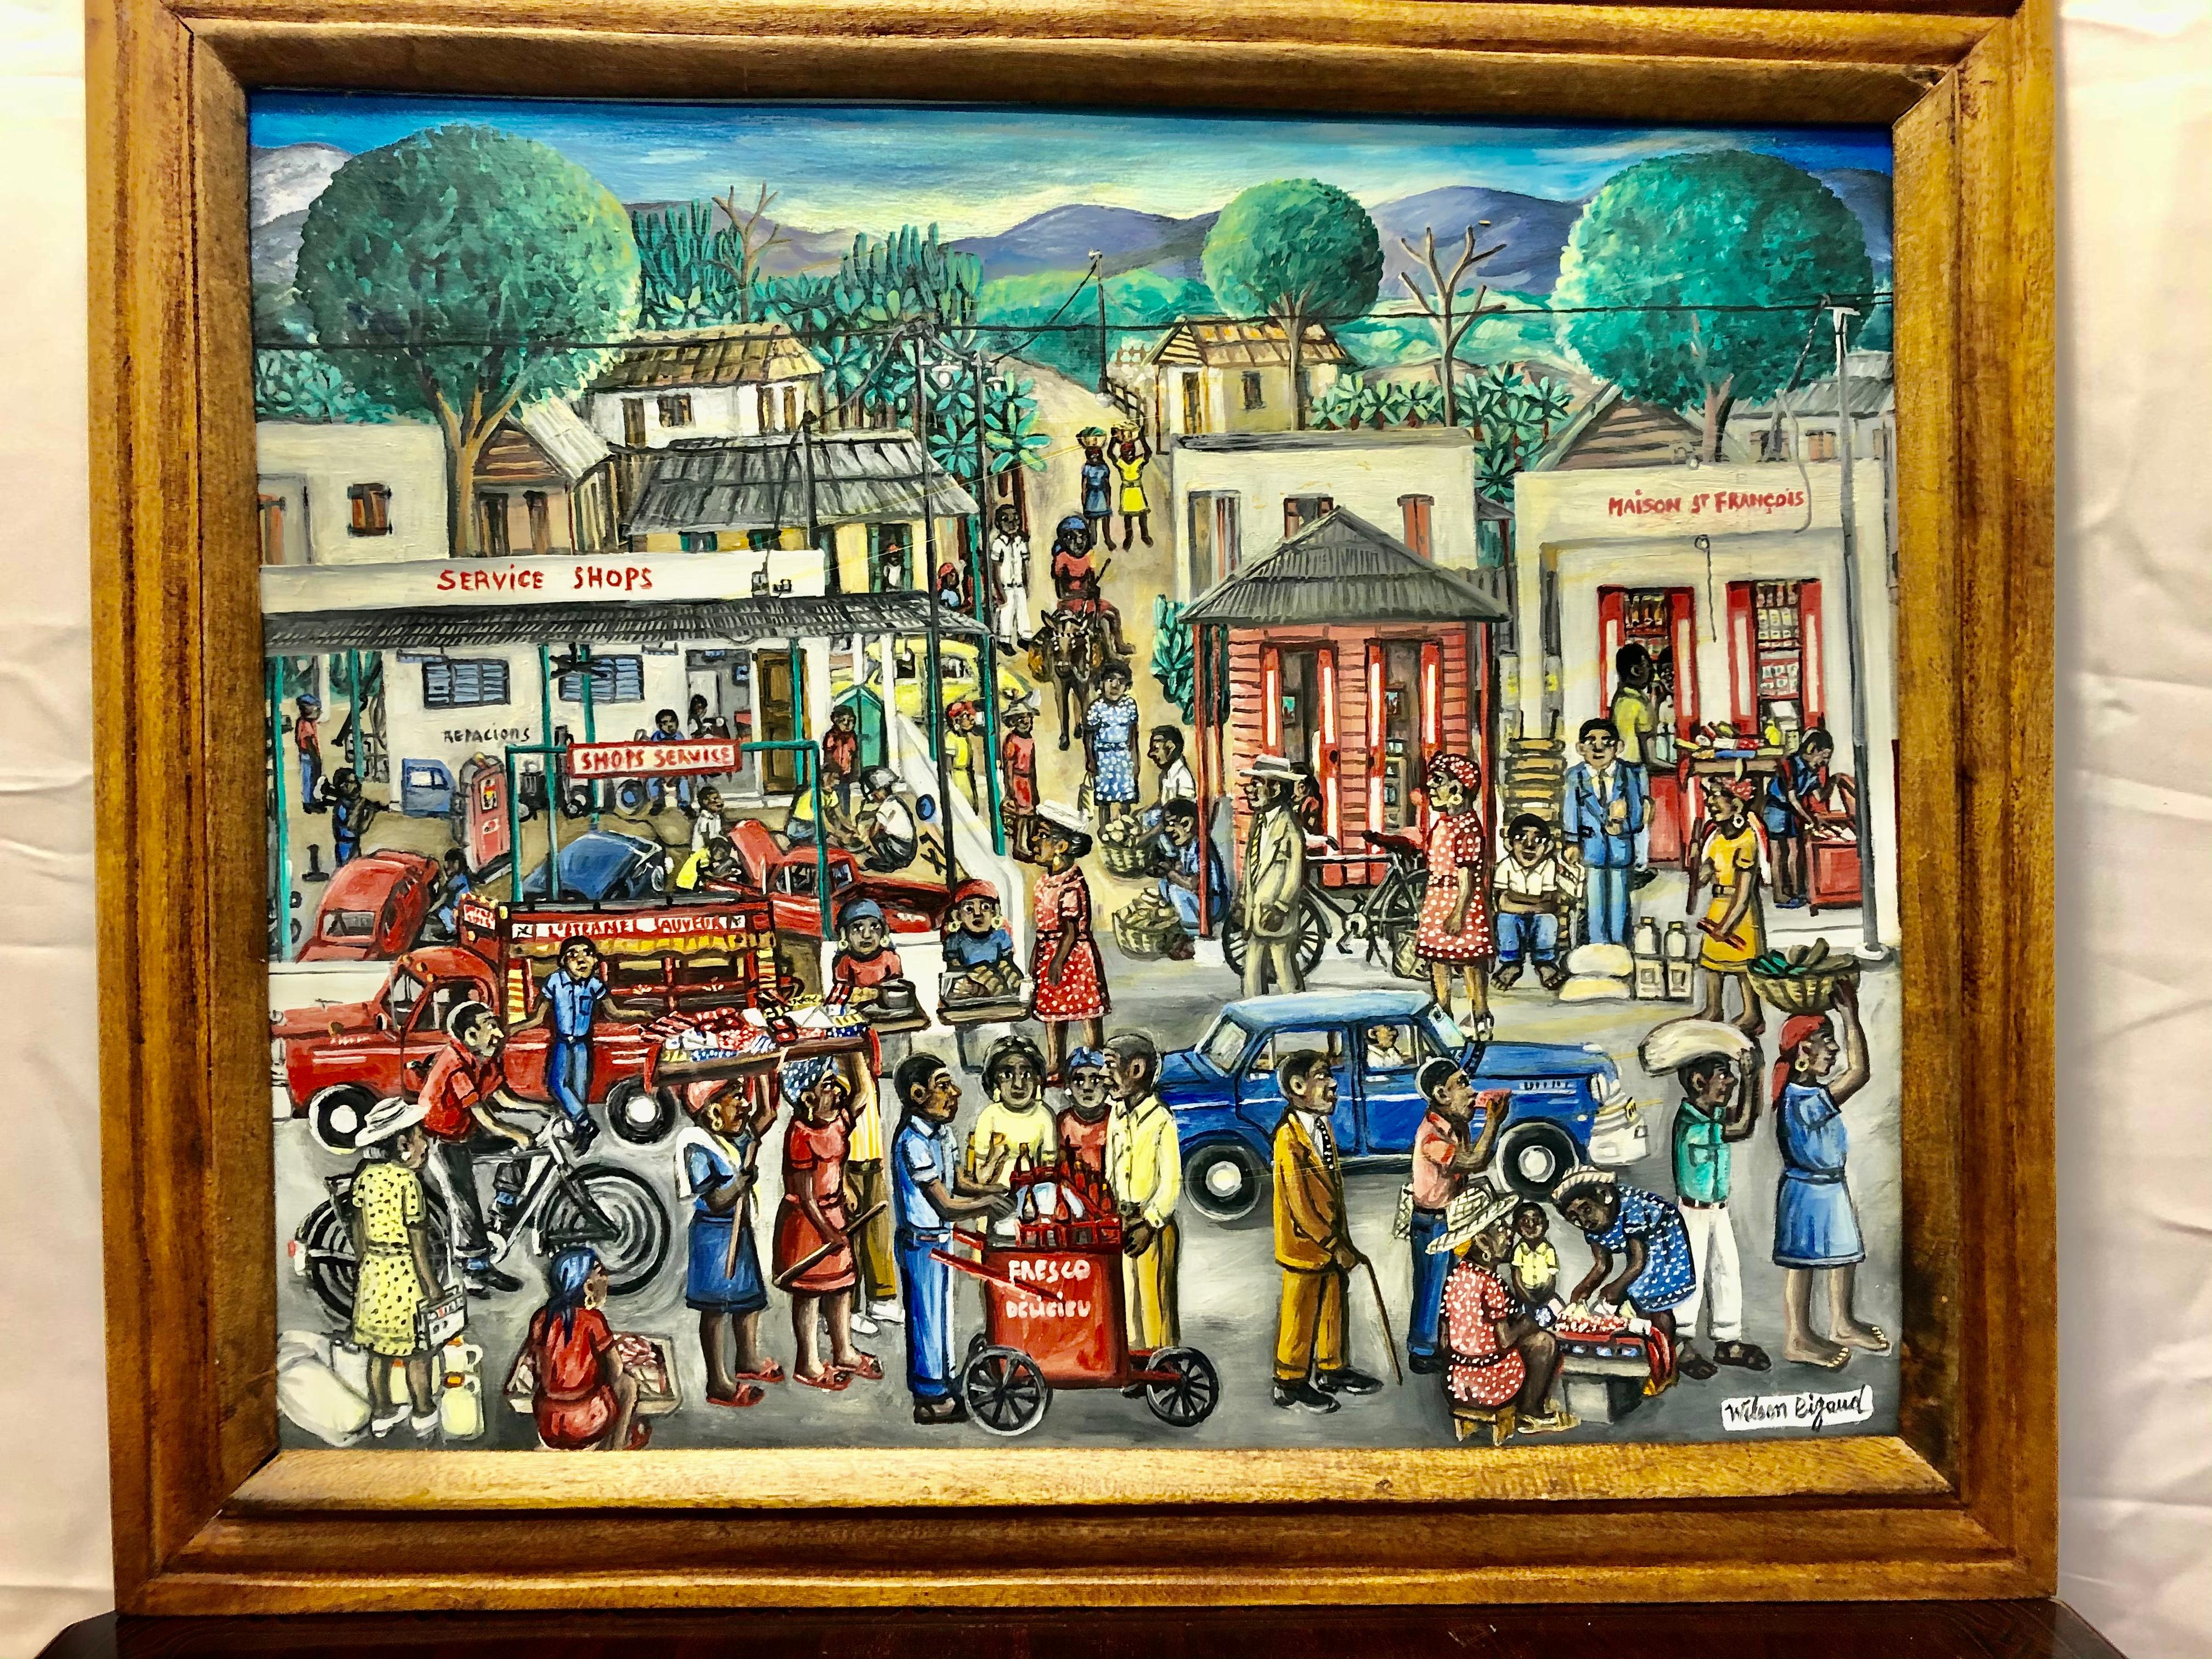 Wilson Bigaud: 1931-2010. Well listed Haitian artist with auction results over $11,000. He is best known for his depiction of daily life in Haiti. This is the finest example of his work we have found. It is so busy with so many people, just what you